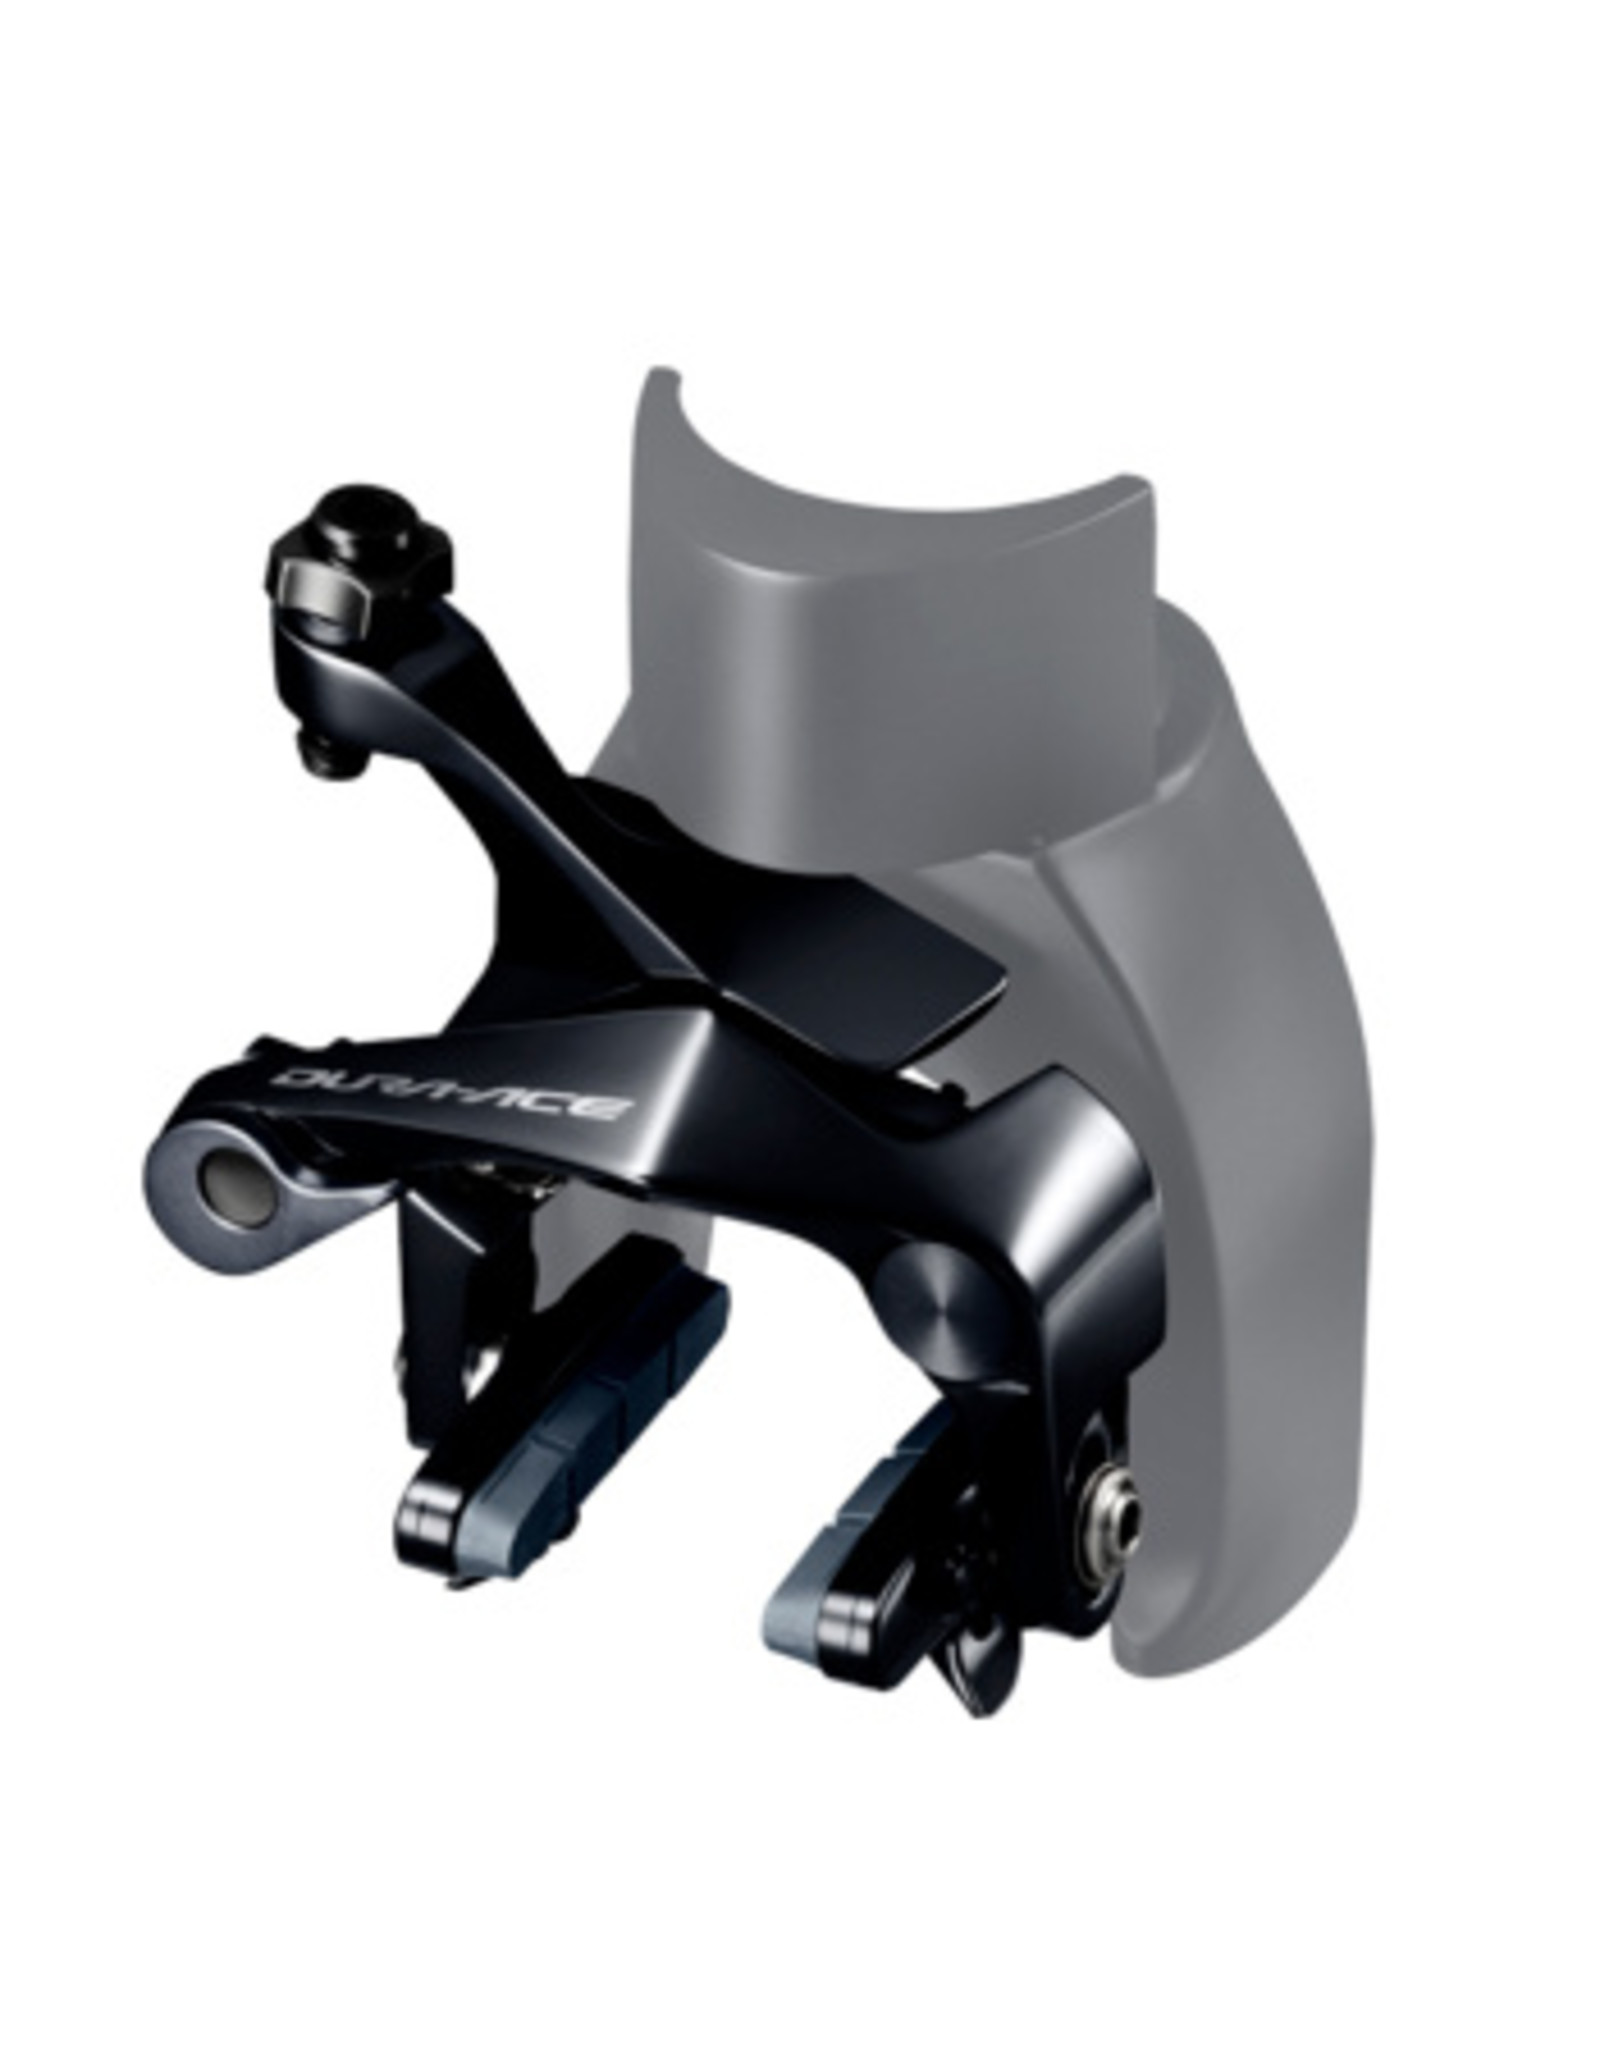 Shimano CALIPER BRAKE, BR-R9110-F, DURA-ACE, FRONT, DIRECT MOUNT TYPE, SHOE:R55C4, IND.PACKCaliper BrakeFront--R55C4 Shoe